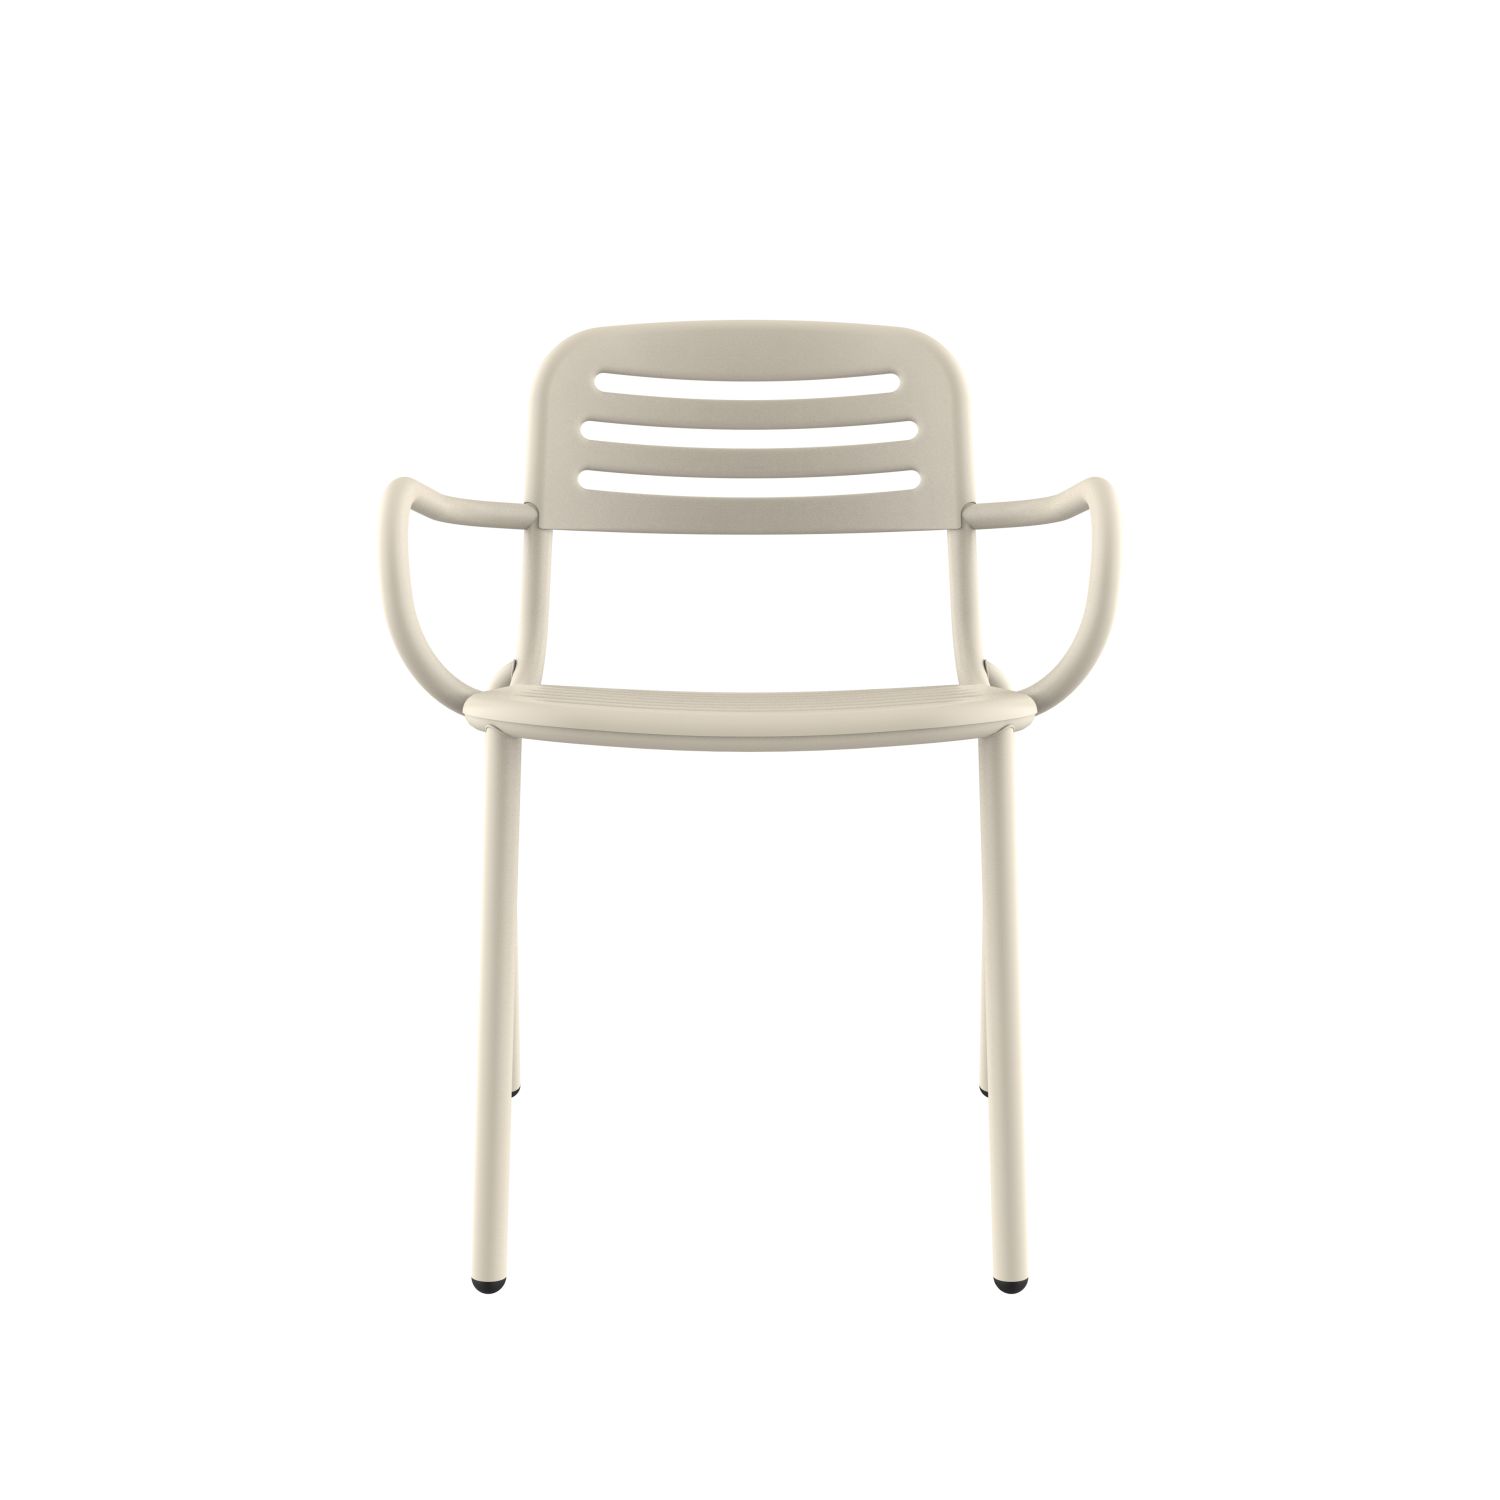 lensvelt studio stefan scholten loop chair stackable with armrests with perforation oyster white ral1013